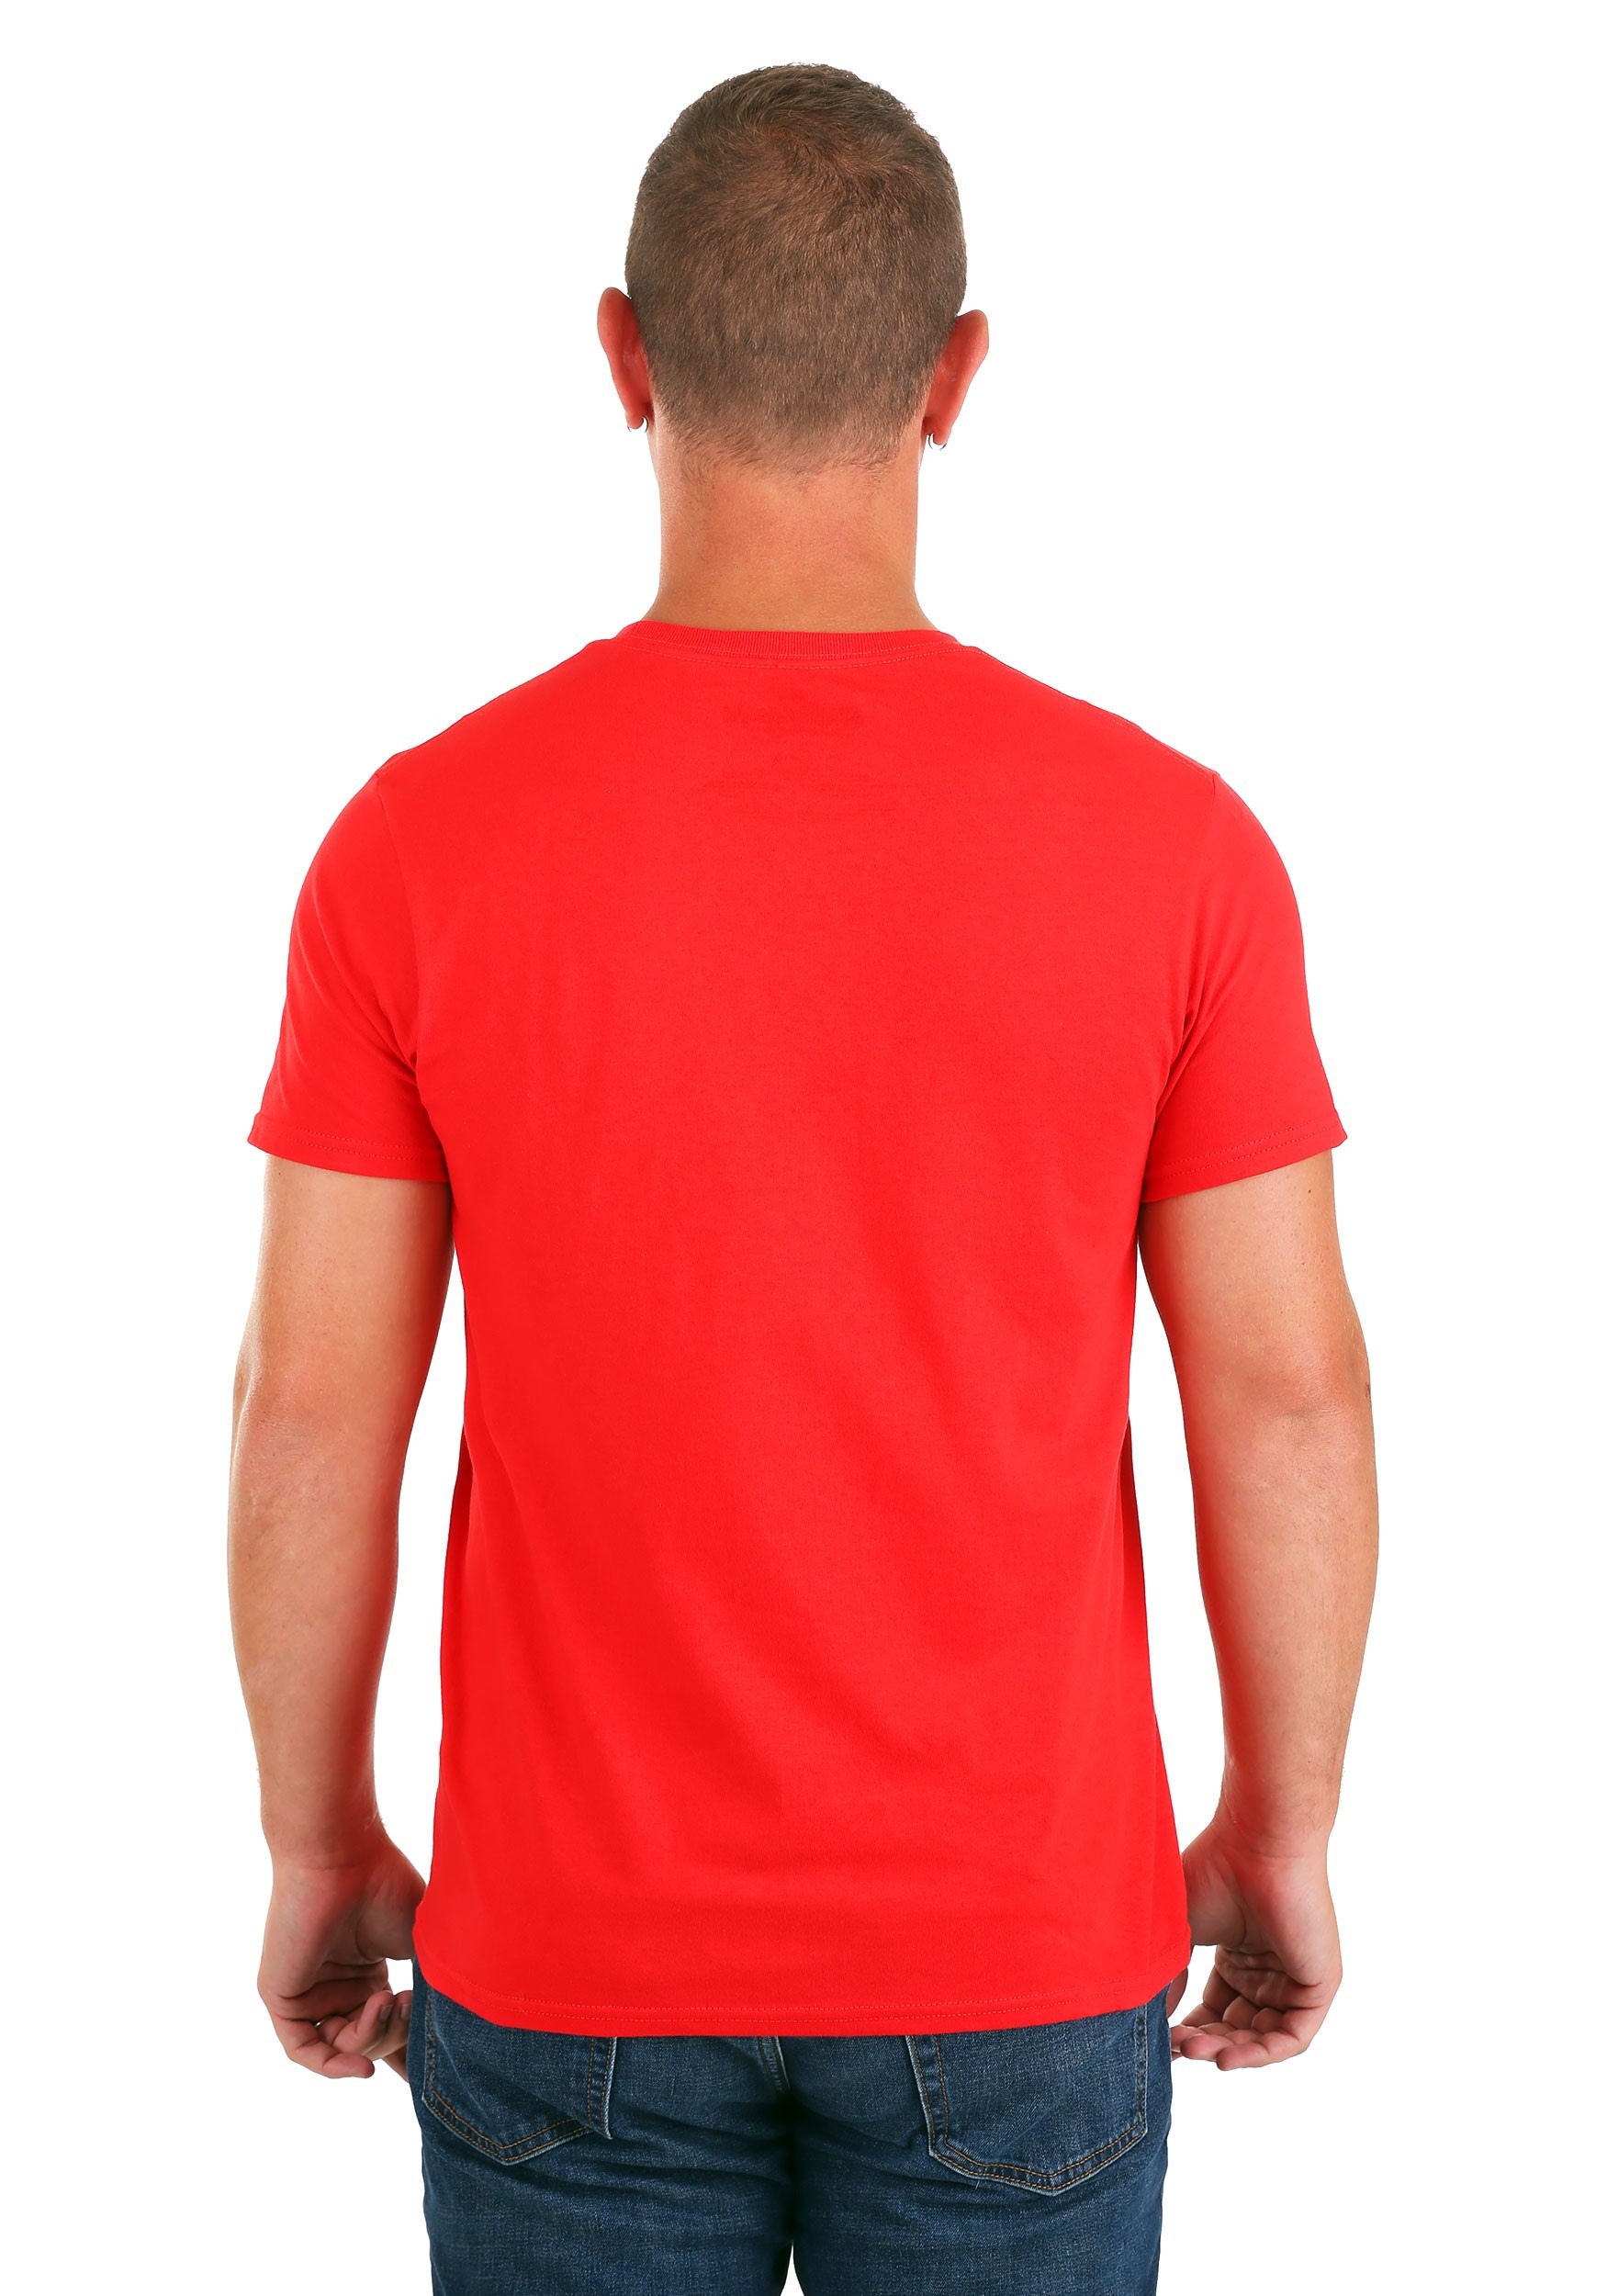 Spider-Man Far From Home T-Shirt For Men